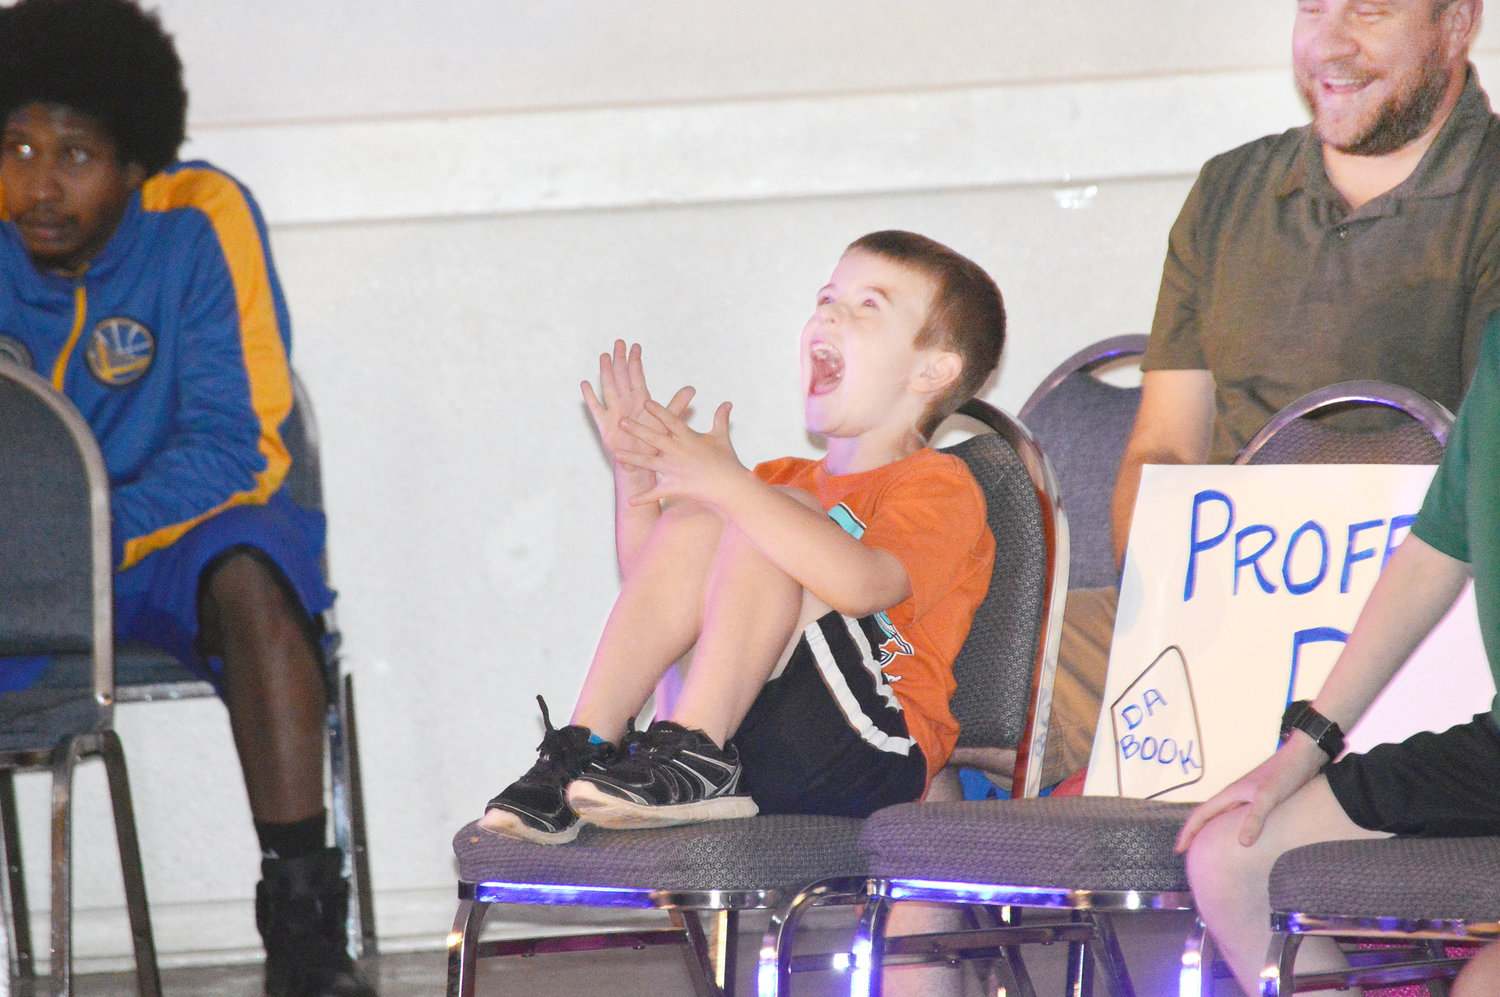 A crowd of over 200 was in attendance at the Lucha Pride Pro Wrestling event at Carroll Green Civic Center Saturday night. This young man was excited at what he was seeing in the ring.